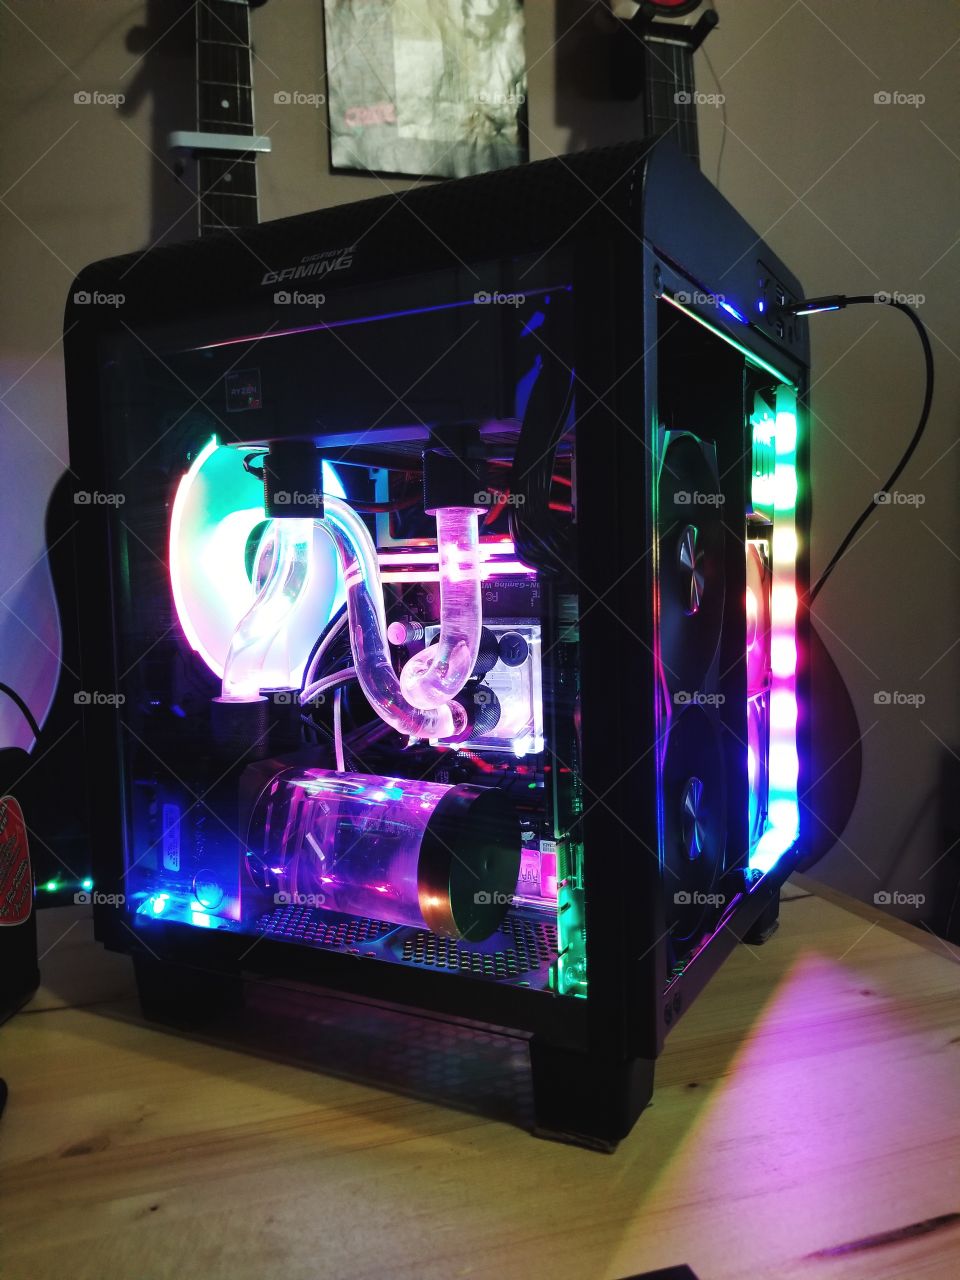 custom gaming PC with water cooling, and rgb lighting.